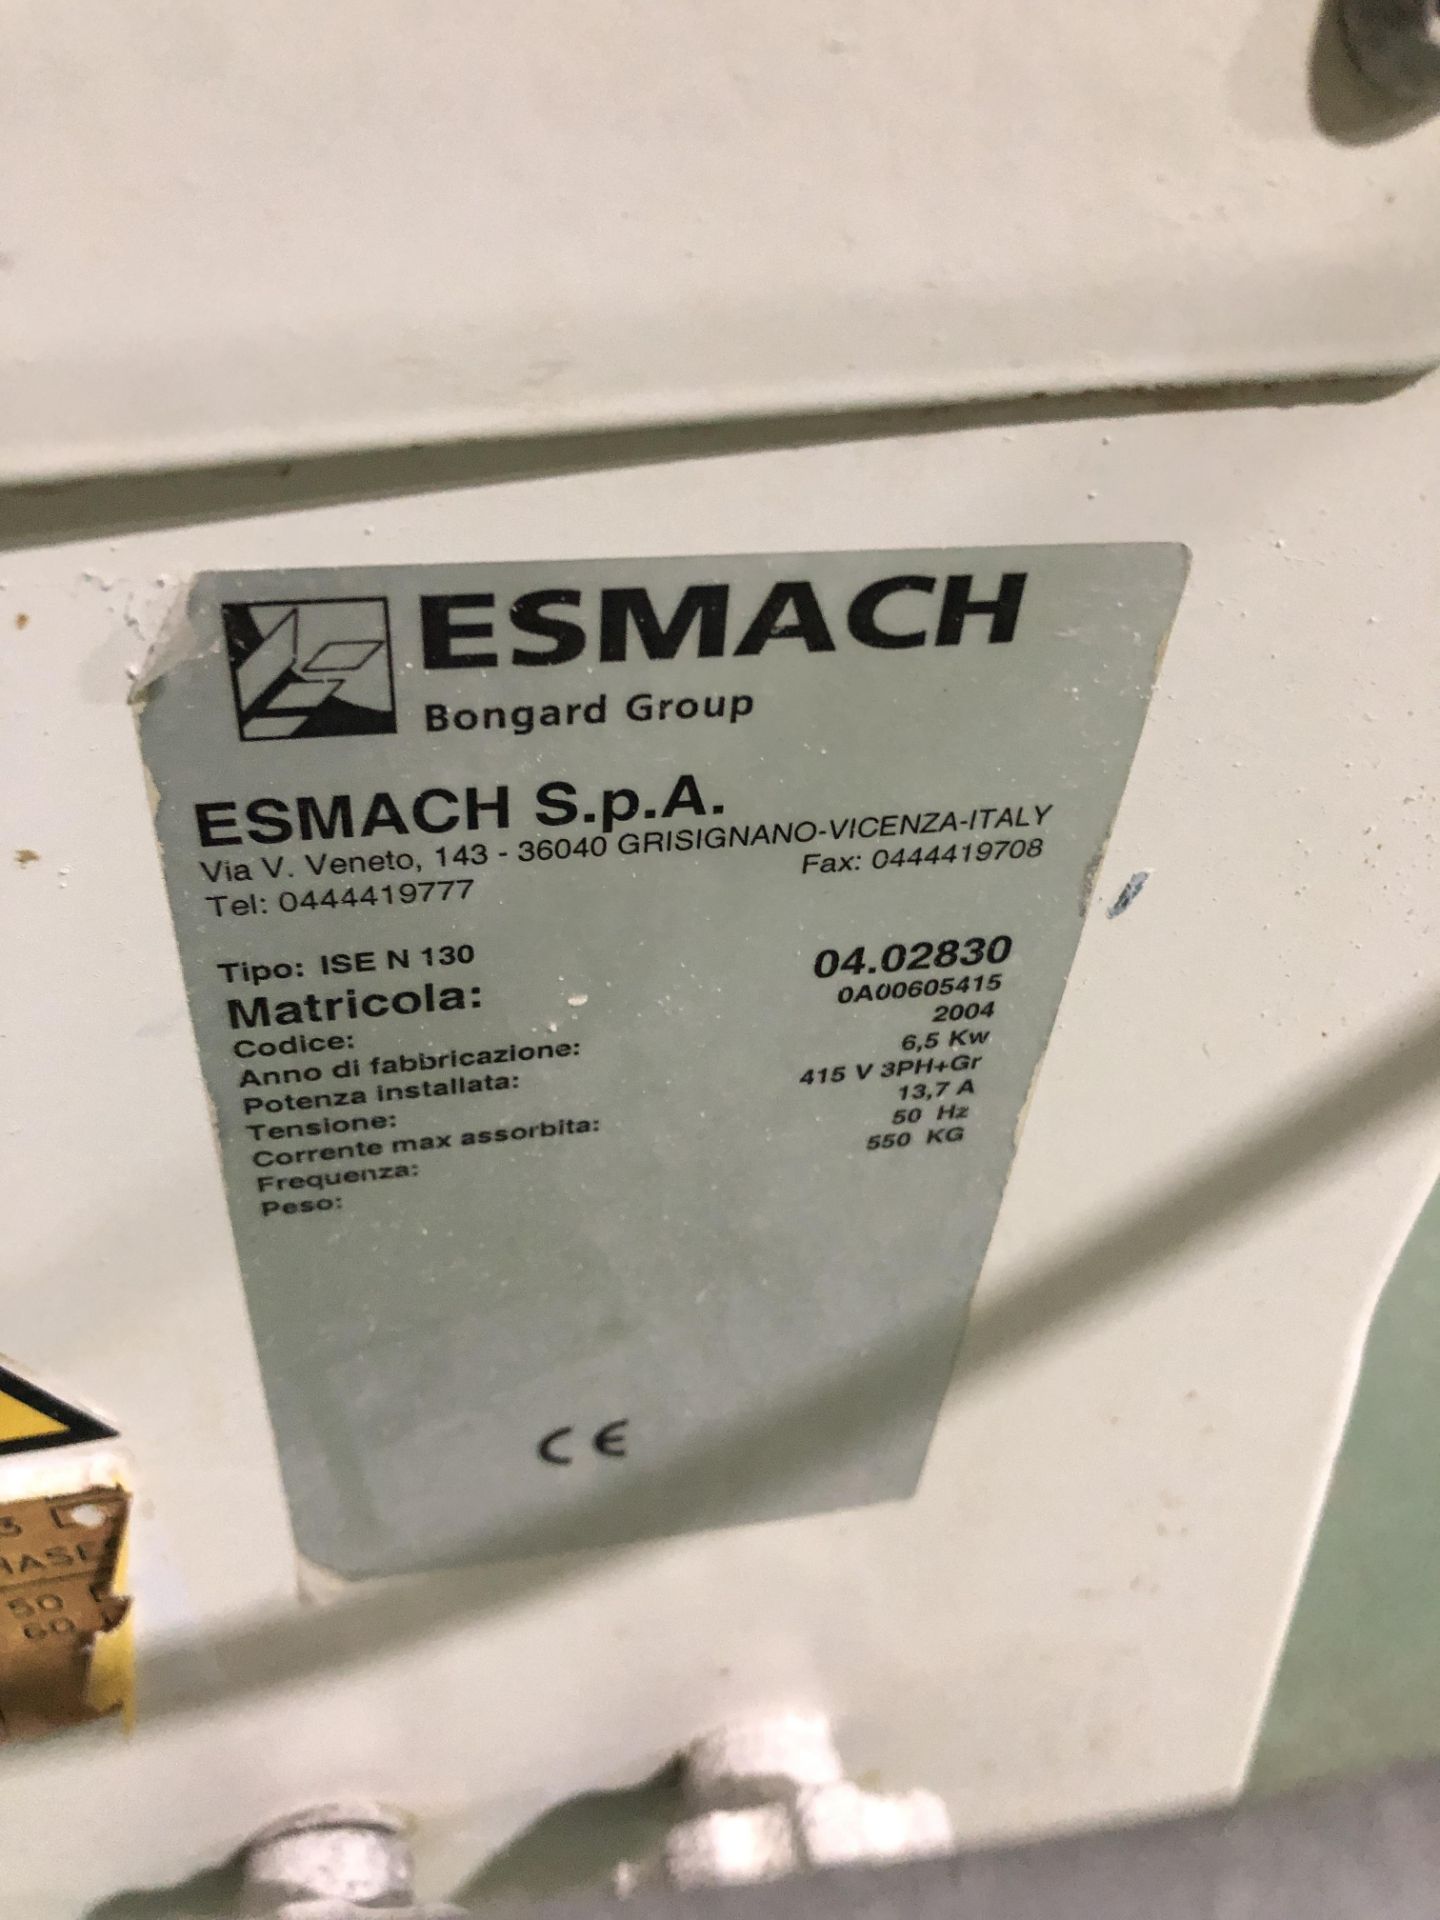 Esmach ISE N 130 3 phase spiral mixer (2004) (Located Milton Keynes) - Image 3 of 4